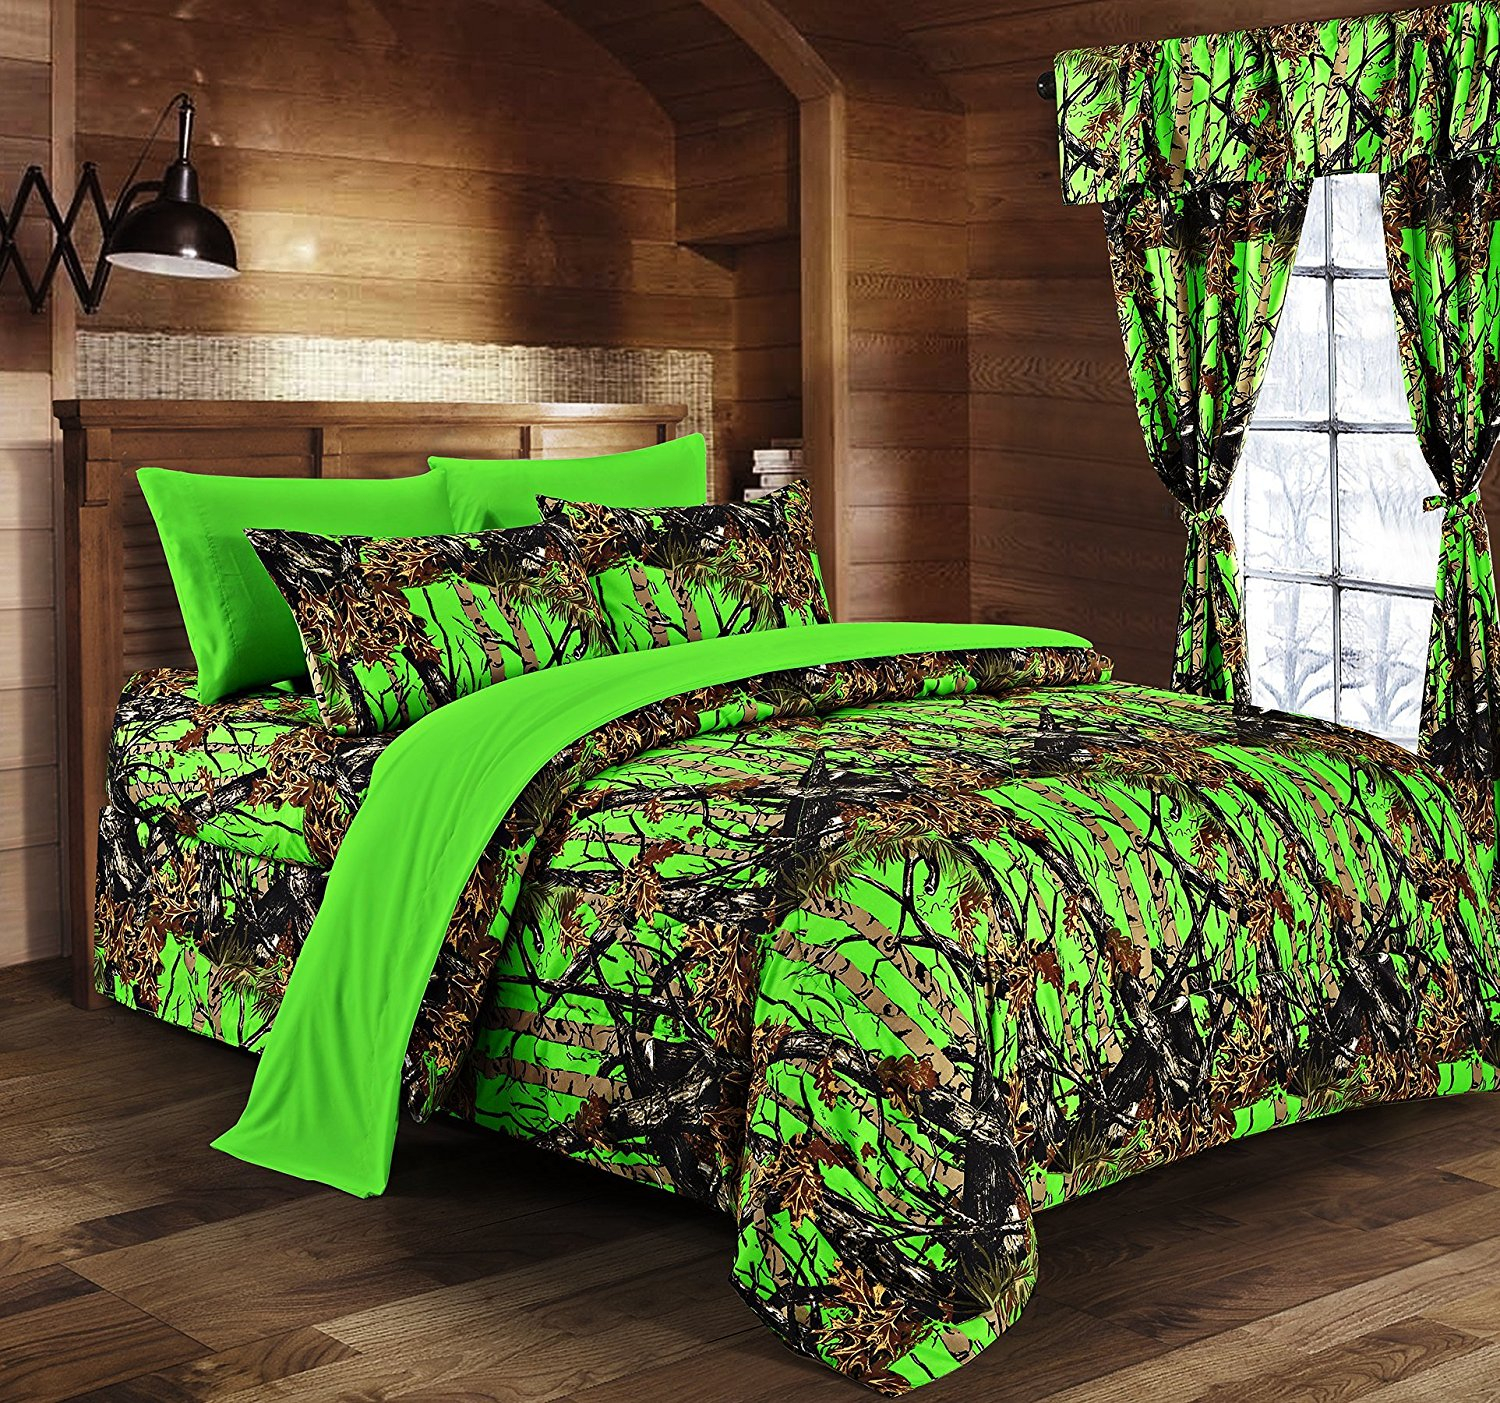 Regal Comfort Biohazard Green Camouflage King 8pc Premium Luxury Comforter Sheet Pillowcases And Bed Skirt Set Camo Bedding Set For Hunters for dimensions 1500 X 1403